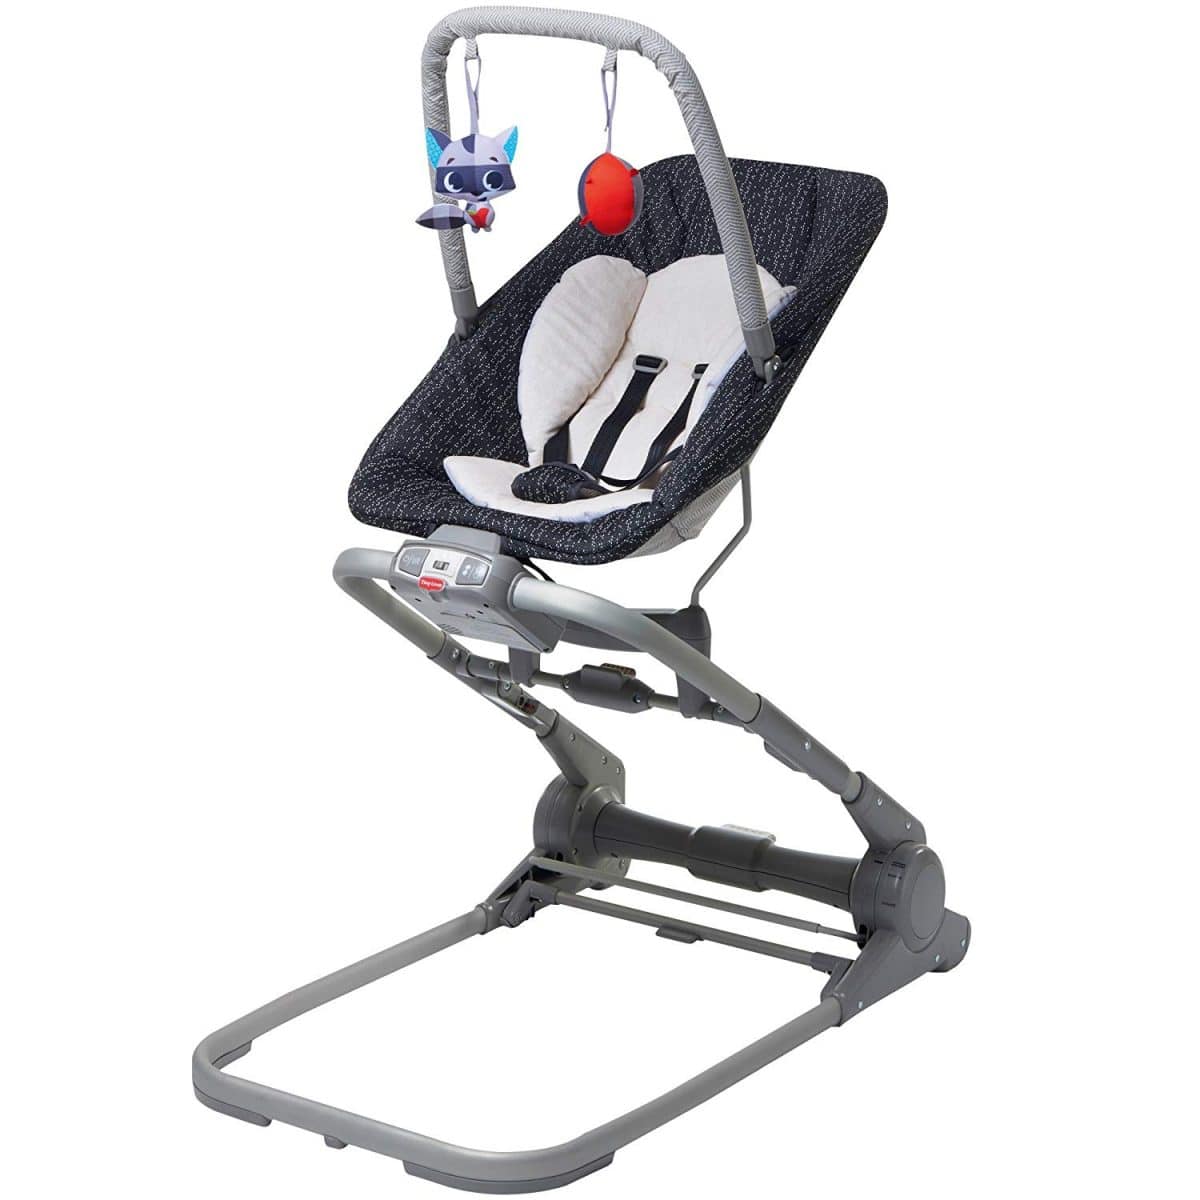 The 10 Best Baby Bouncer Seats To Buy 2020 Littleonemag